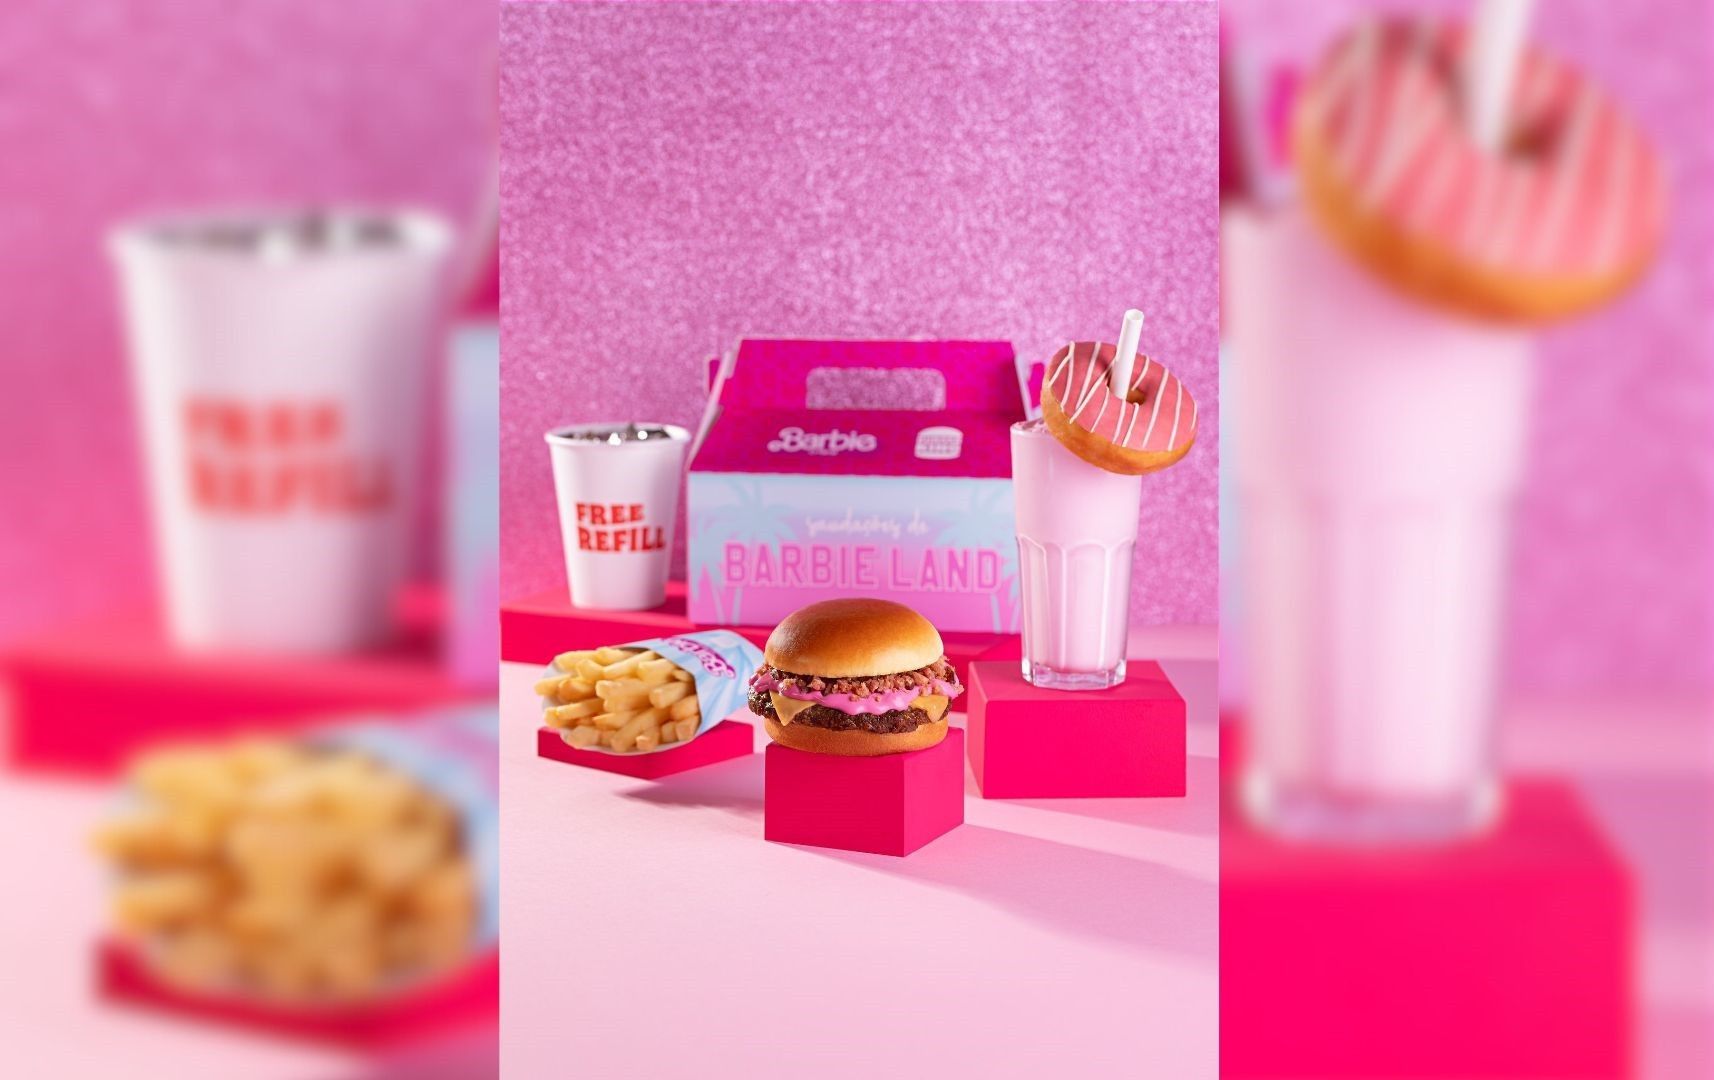 Burger King Brazil releases Barbie-themed cheeseburger meal